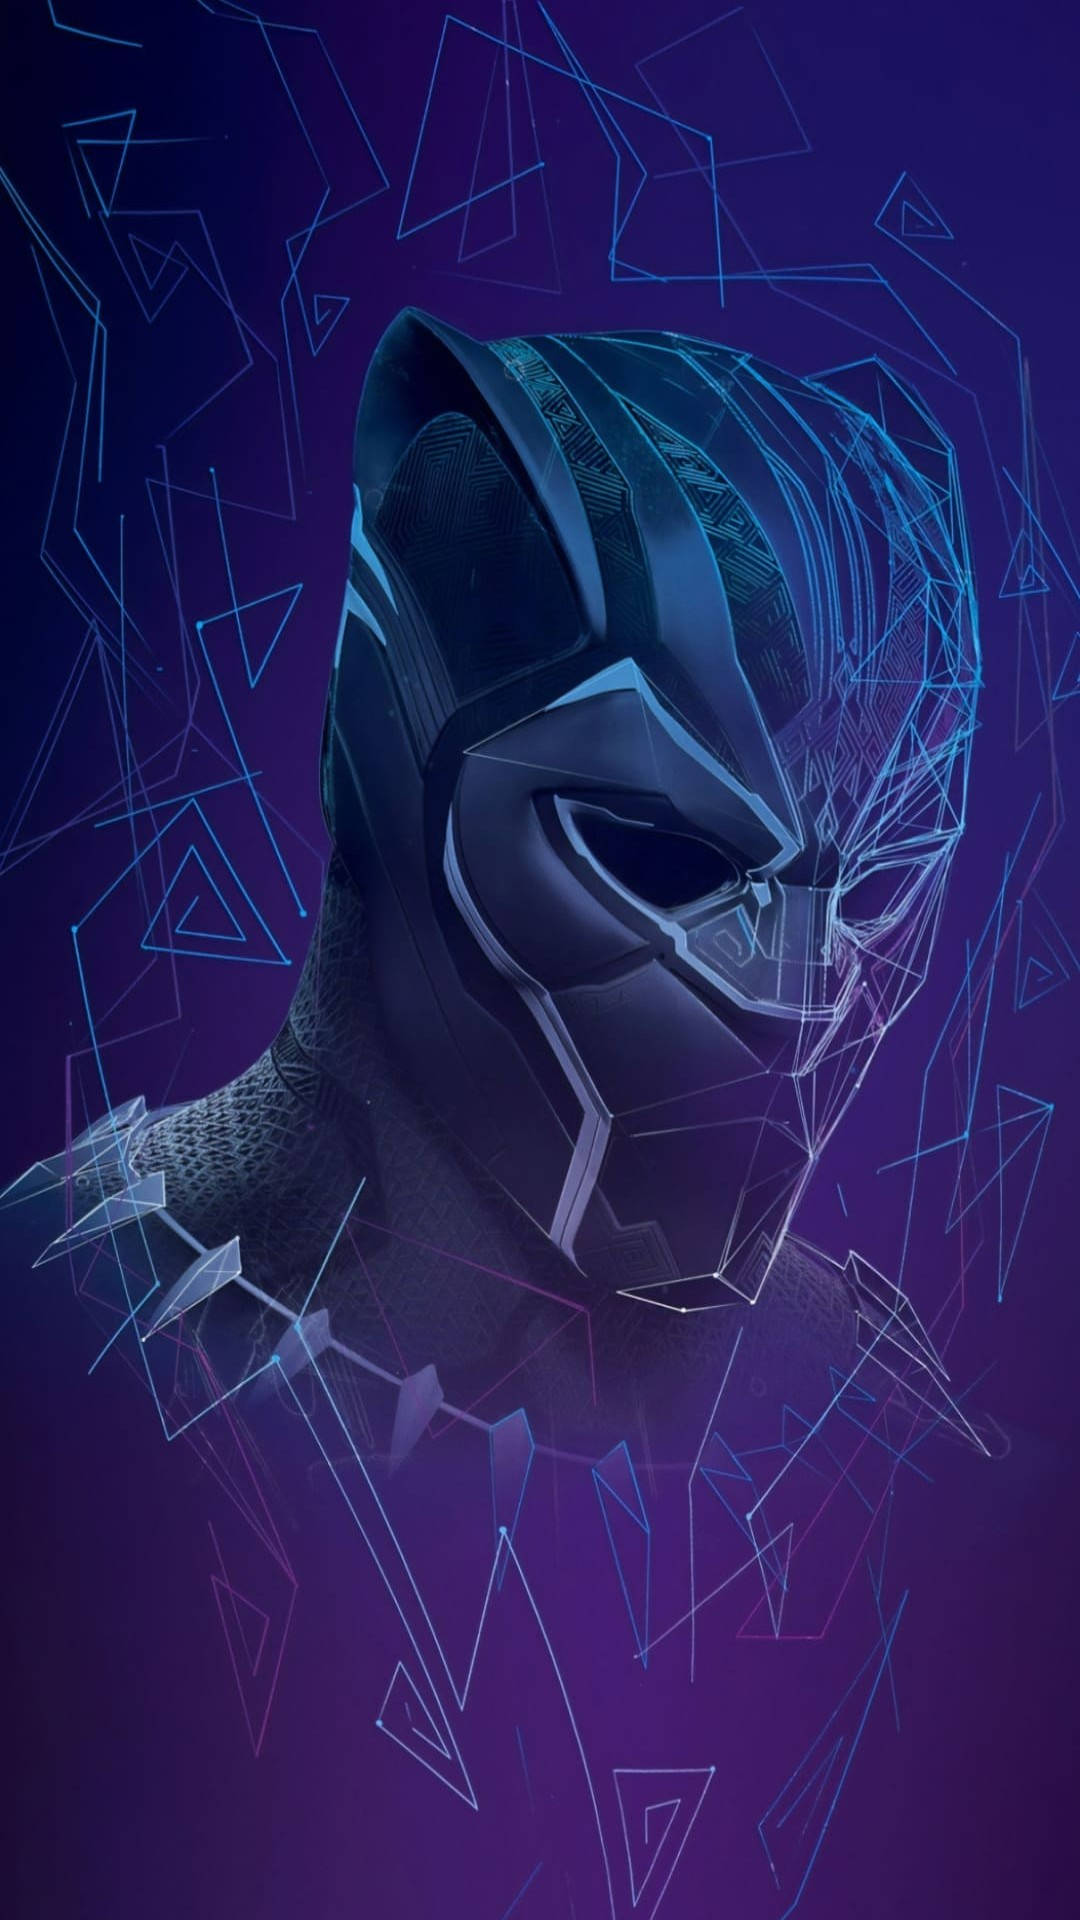 Download The Best Hd Phone Marvel Black Panther Mask Wallpaper | Wallpapers .com